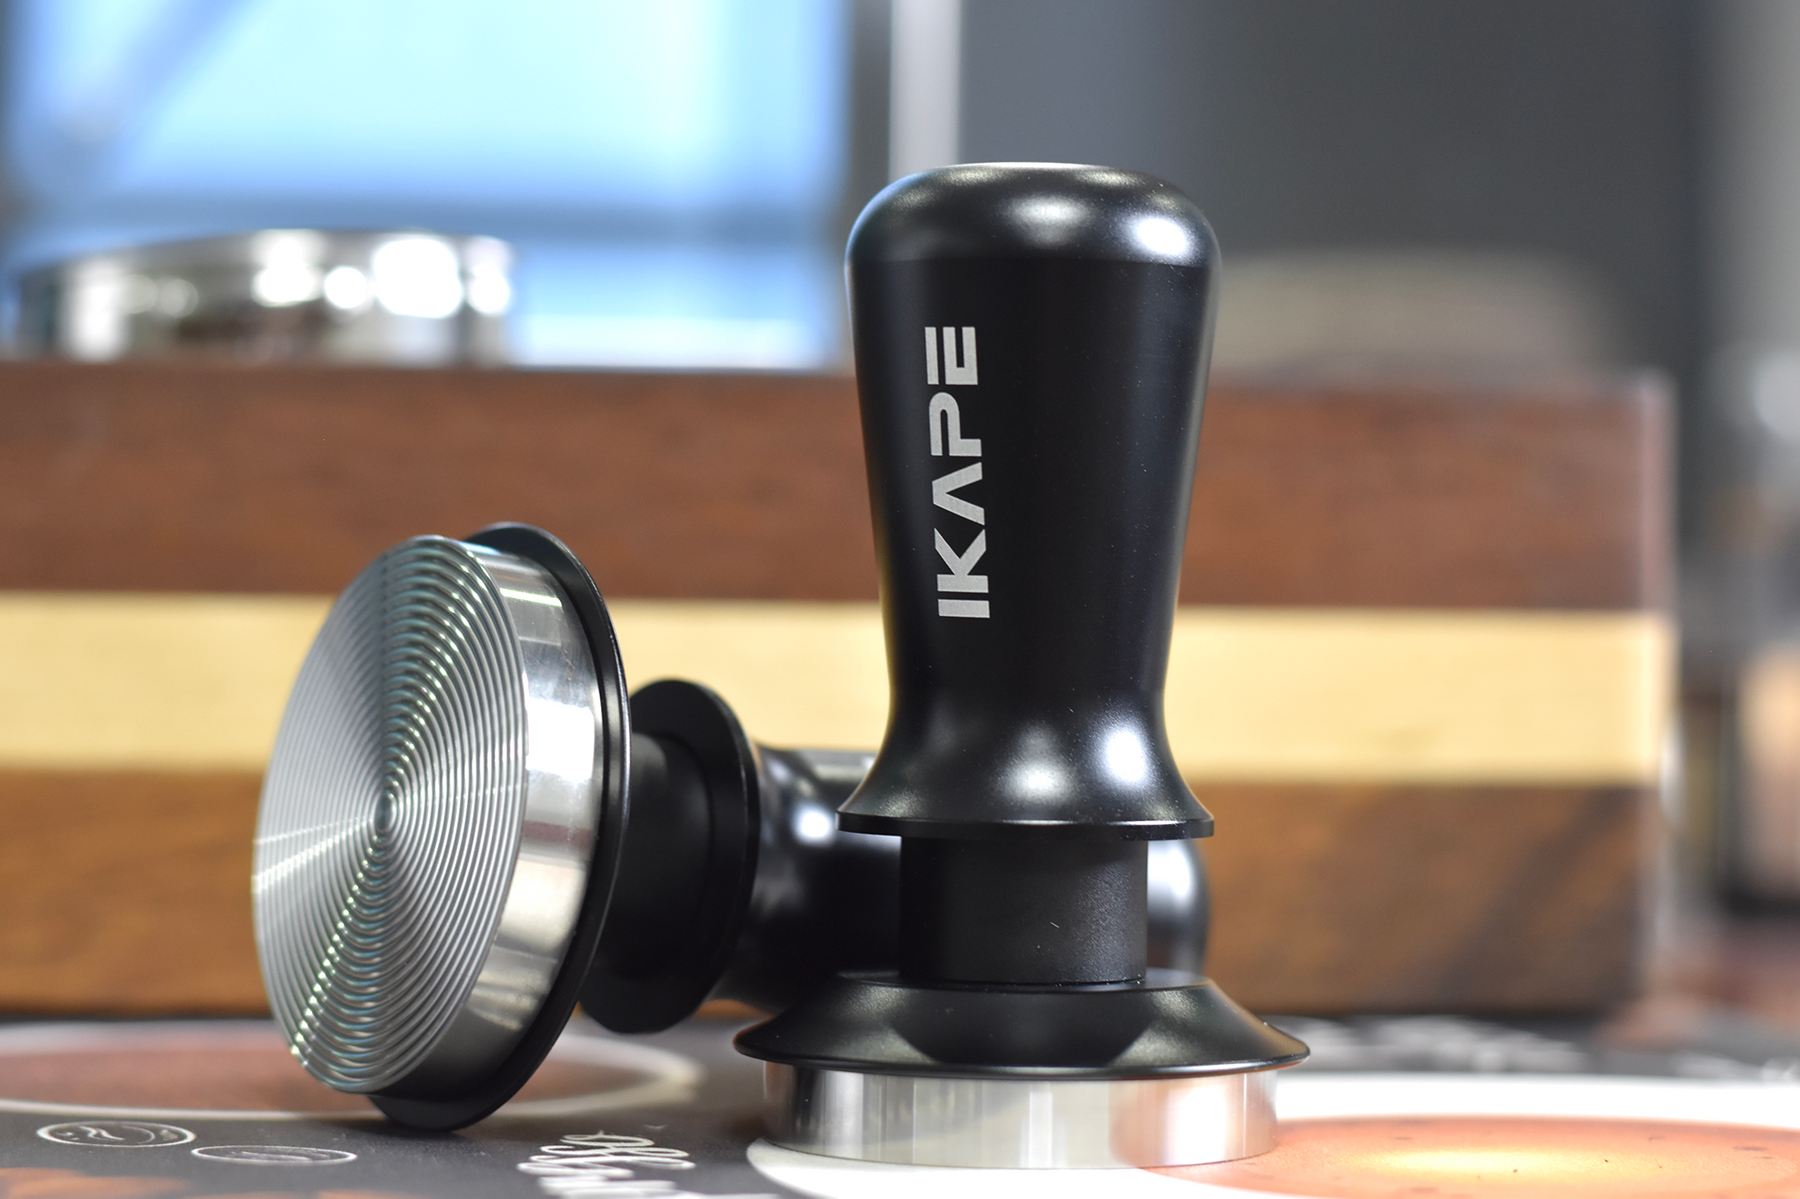 IKAPE 58mm Espresso Tamper, Premium Barista Coffee Tamper with Calibrated  Spring Loaded, 100% Stainless Steel Base Tamper Compatible with Espresso